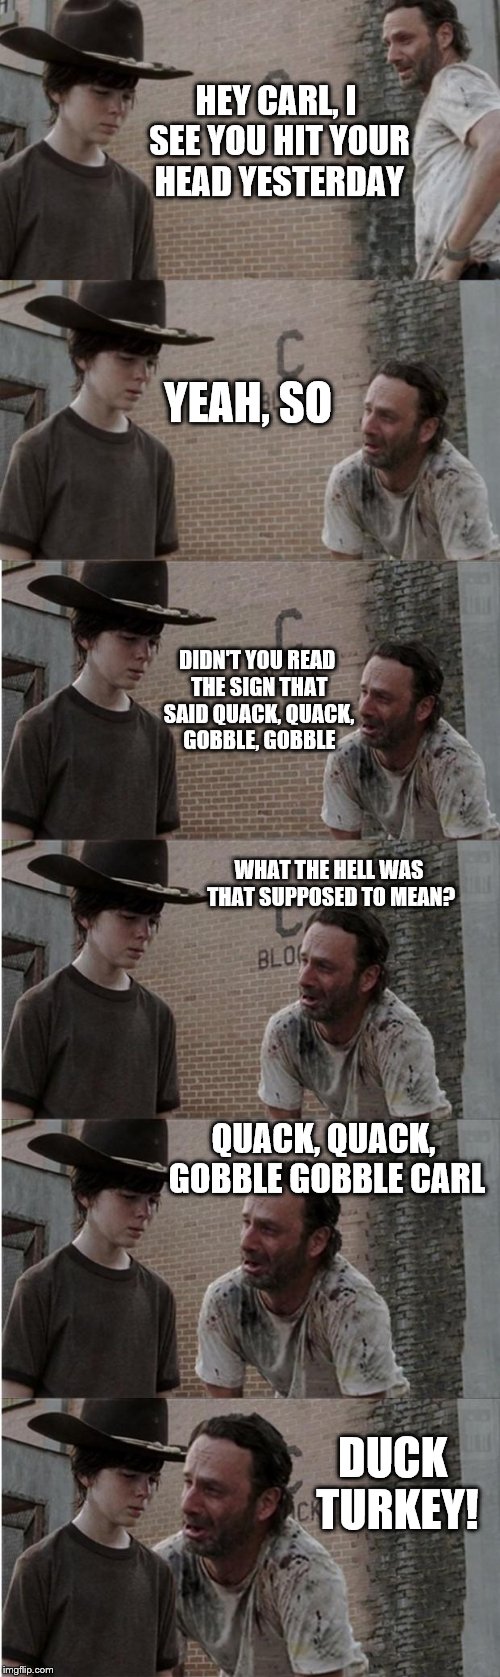 Rick and Carl Longer Meme | HEY CARL, I SEE YOU HIT YOUR HEAD YESTERDAY; YEAH, SO; DIDN'T YOU READ THE SIGN THAT SAID QUACK, QUACK, GOBBLE, GOBBLE; WHAT THE HELL WAS THAT SUPPOSED TO MEAN? QUACK, QUACK, GOBBLE GOBBLE CARL; DUCK TURKEY! | image tagged in memes,rick and carl longer | made w/ Imgflip meme maker